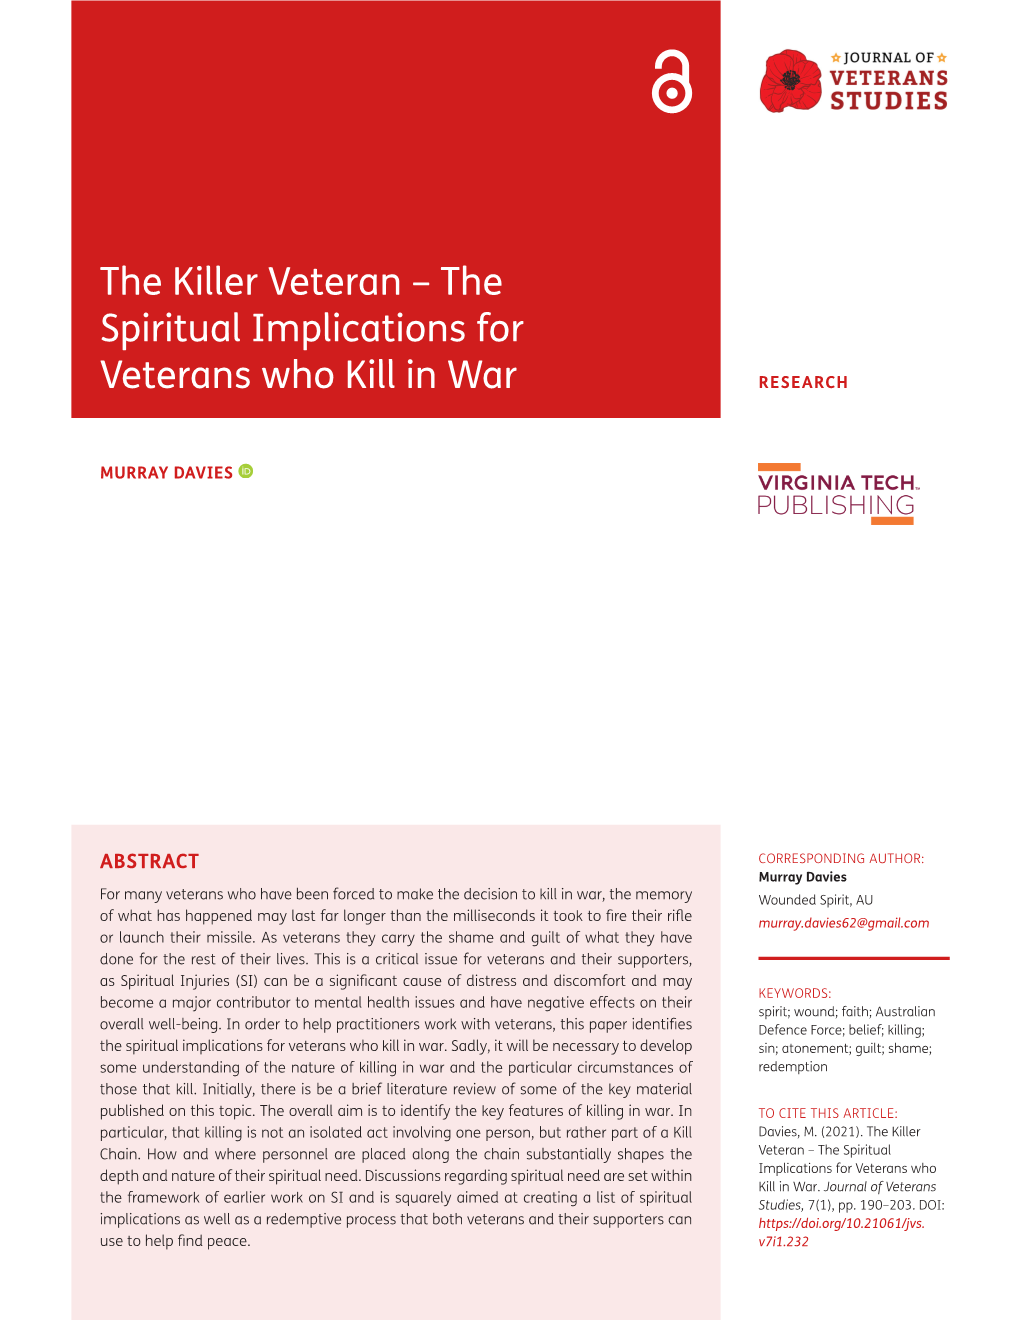 The Spiritual Implications for Veterans Who Kill in War